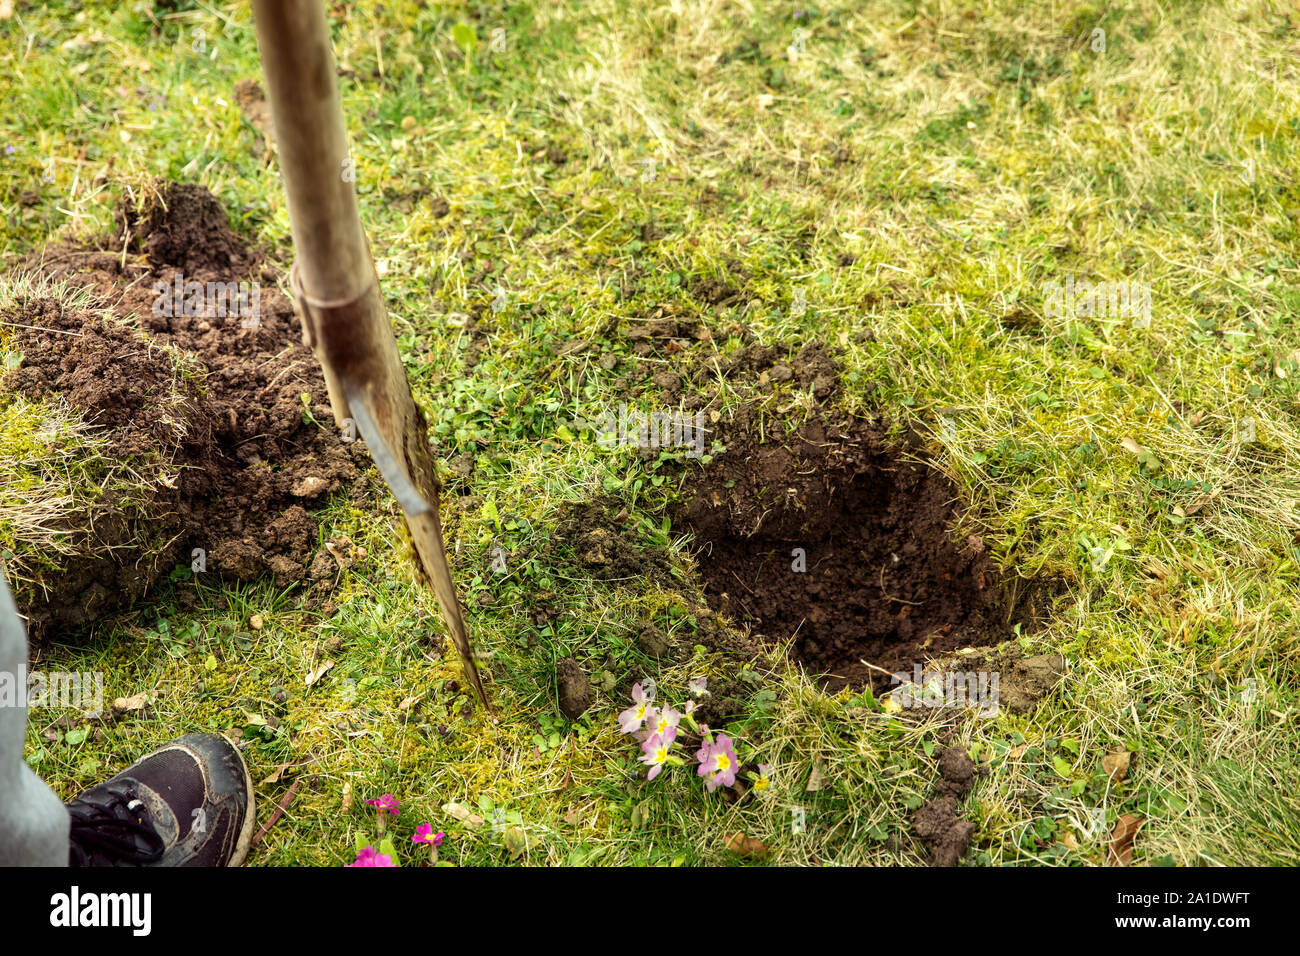 Garden work with a Spade, digging a hole in the meadow for planting a tree Stock Photo